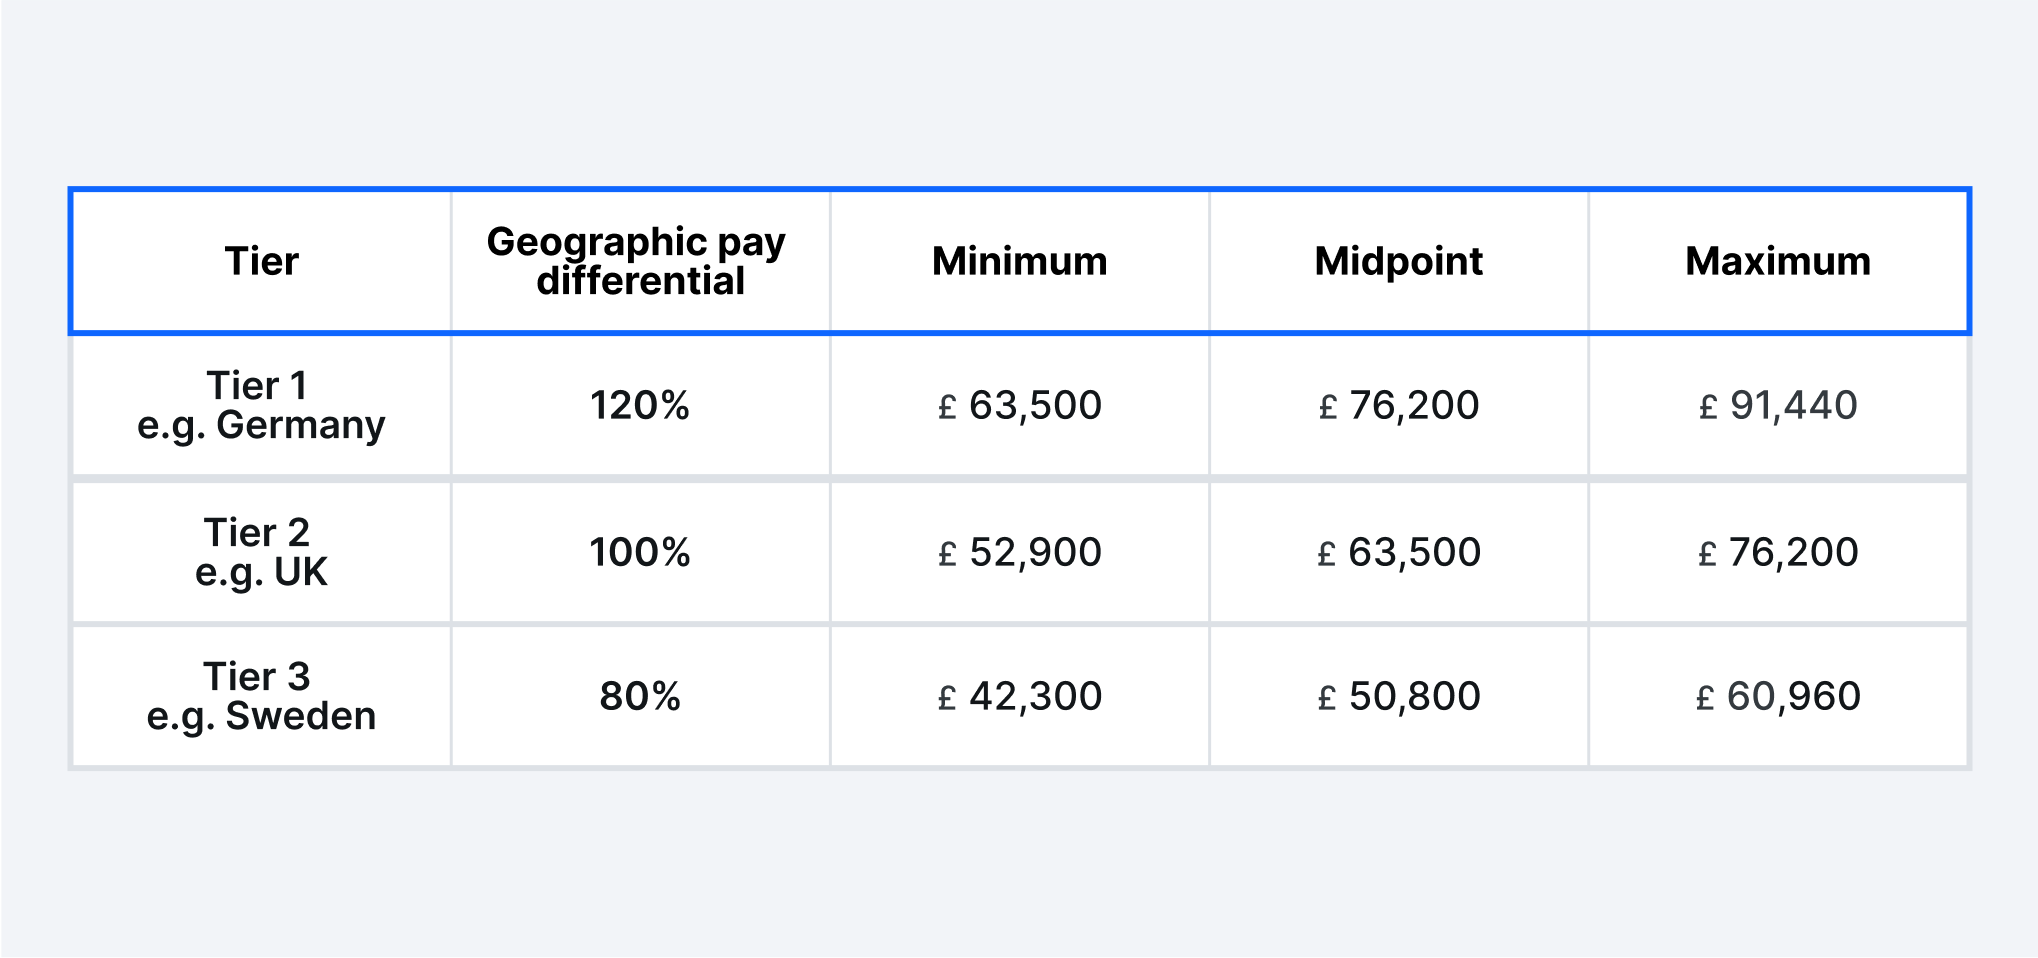 Table showing three tiers of localised pay, tier 1 with a 120% geographic pay differential, tier 2 a 100% geographic pay differential and tier 3 an 80% geographic pay differential.